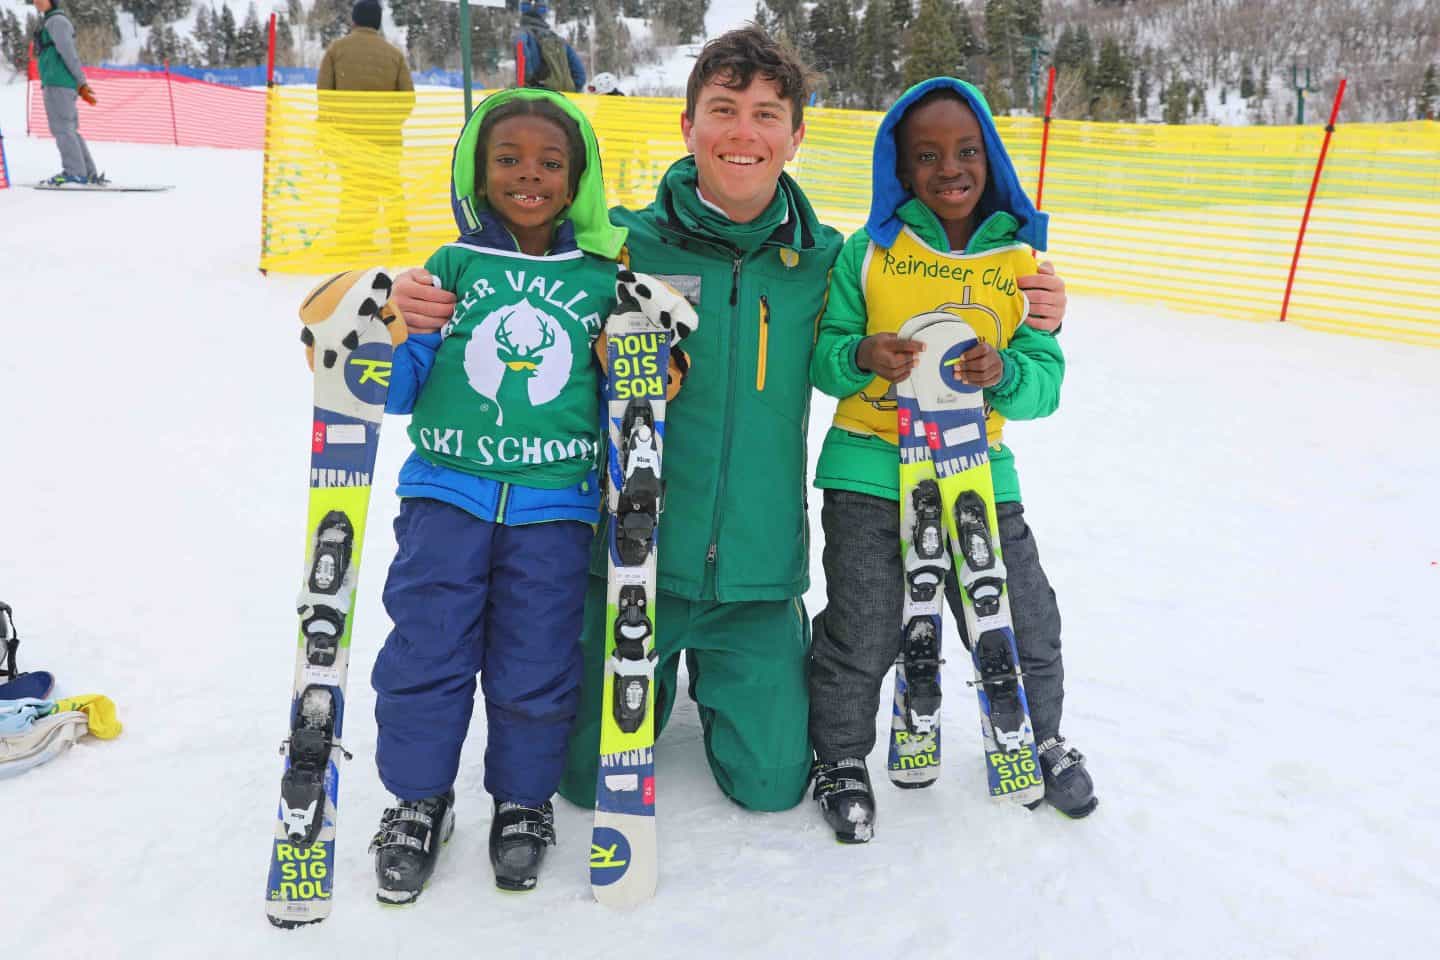 black kids receive ski lesson from instructor